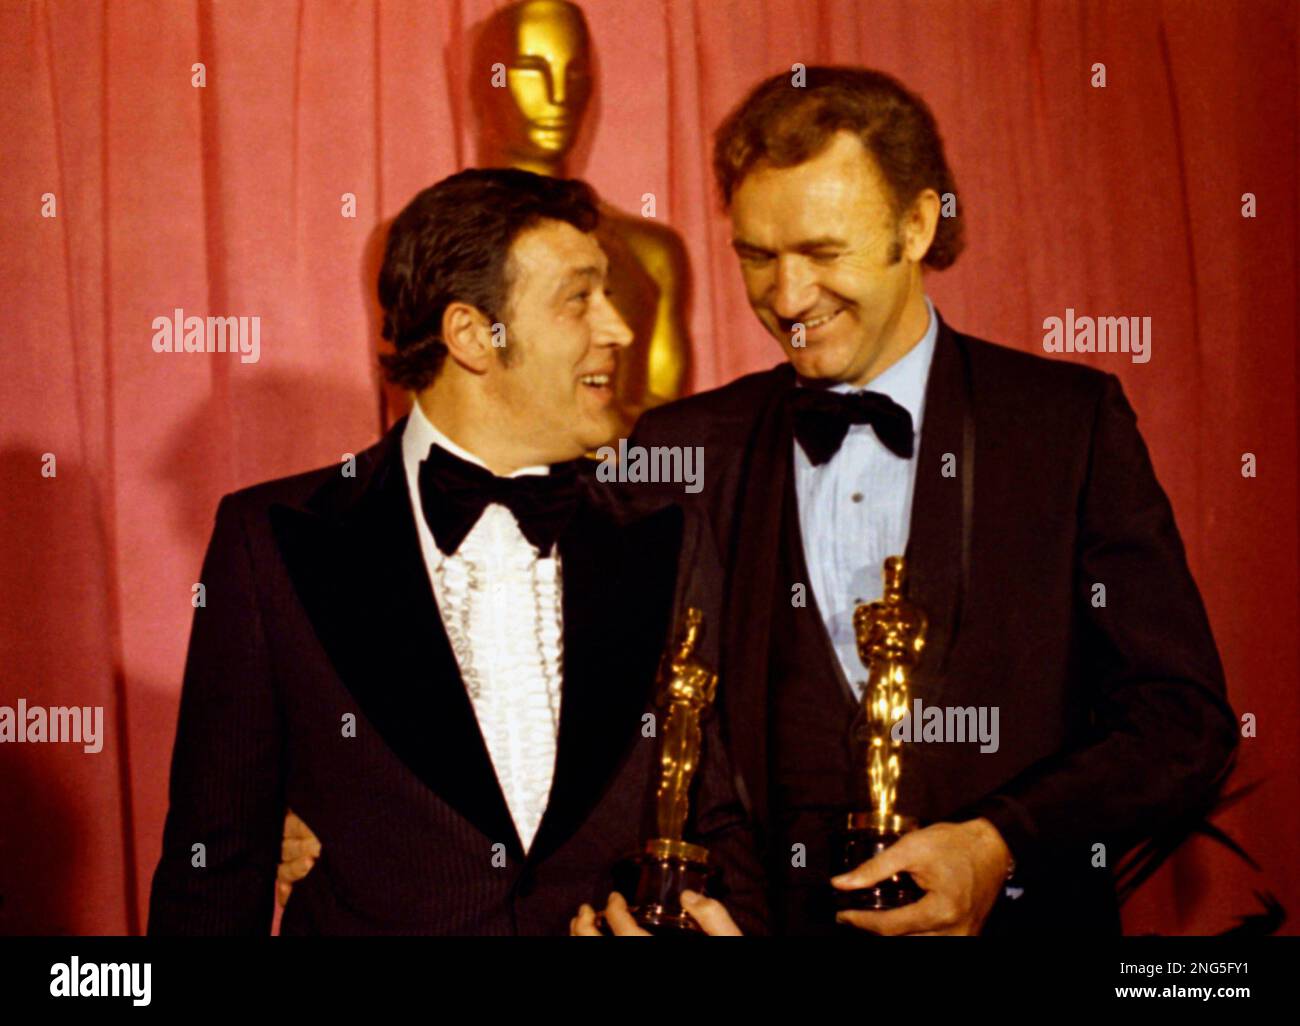 https://c8.alamy.com/comp/2NG5FY1/philip-dantoni-wins-an-oscar-for-the-french-connection-and-gene-hackman-wins-for-best-actor-at-the-academy-awards-march-27-1971-at-the-dorothy-chandler-pavilion-los-angeles-ap-photo-2NG5FY1.jpg